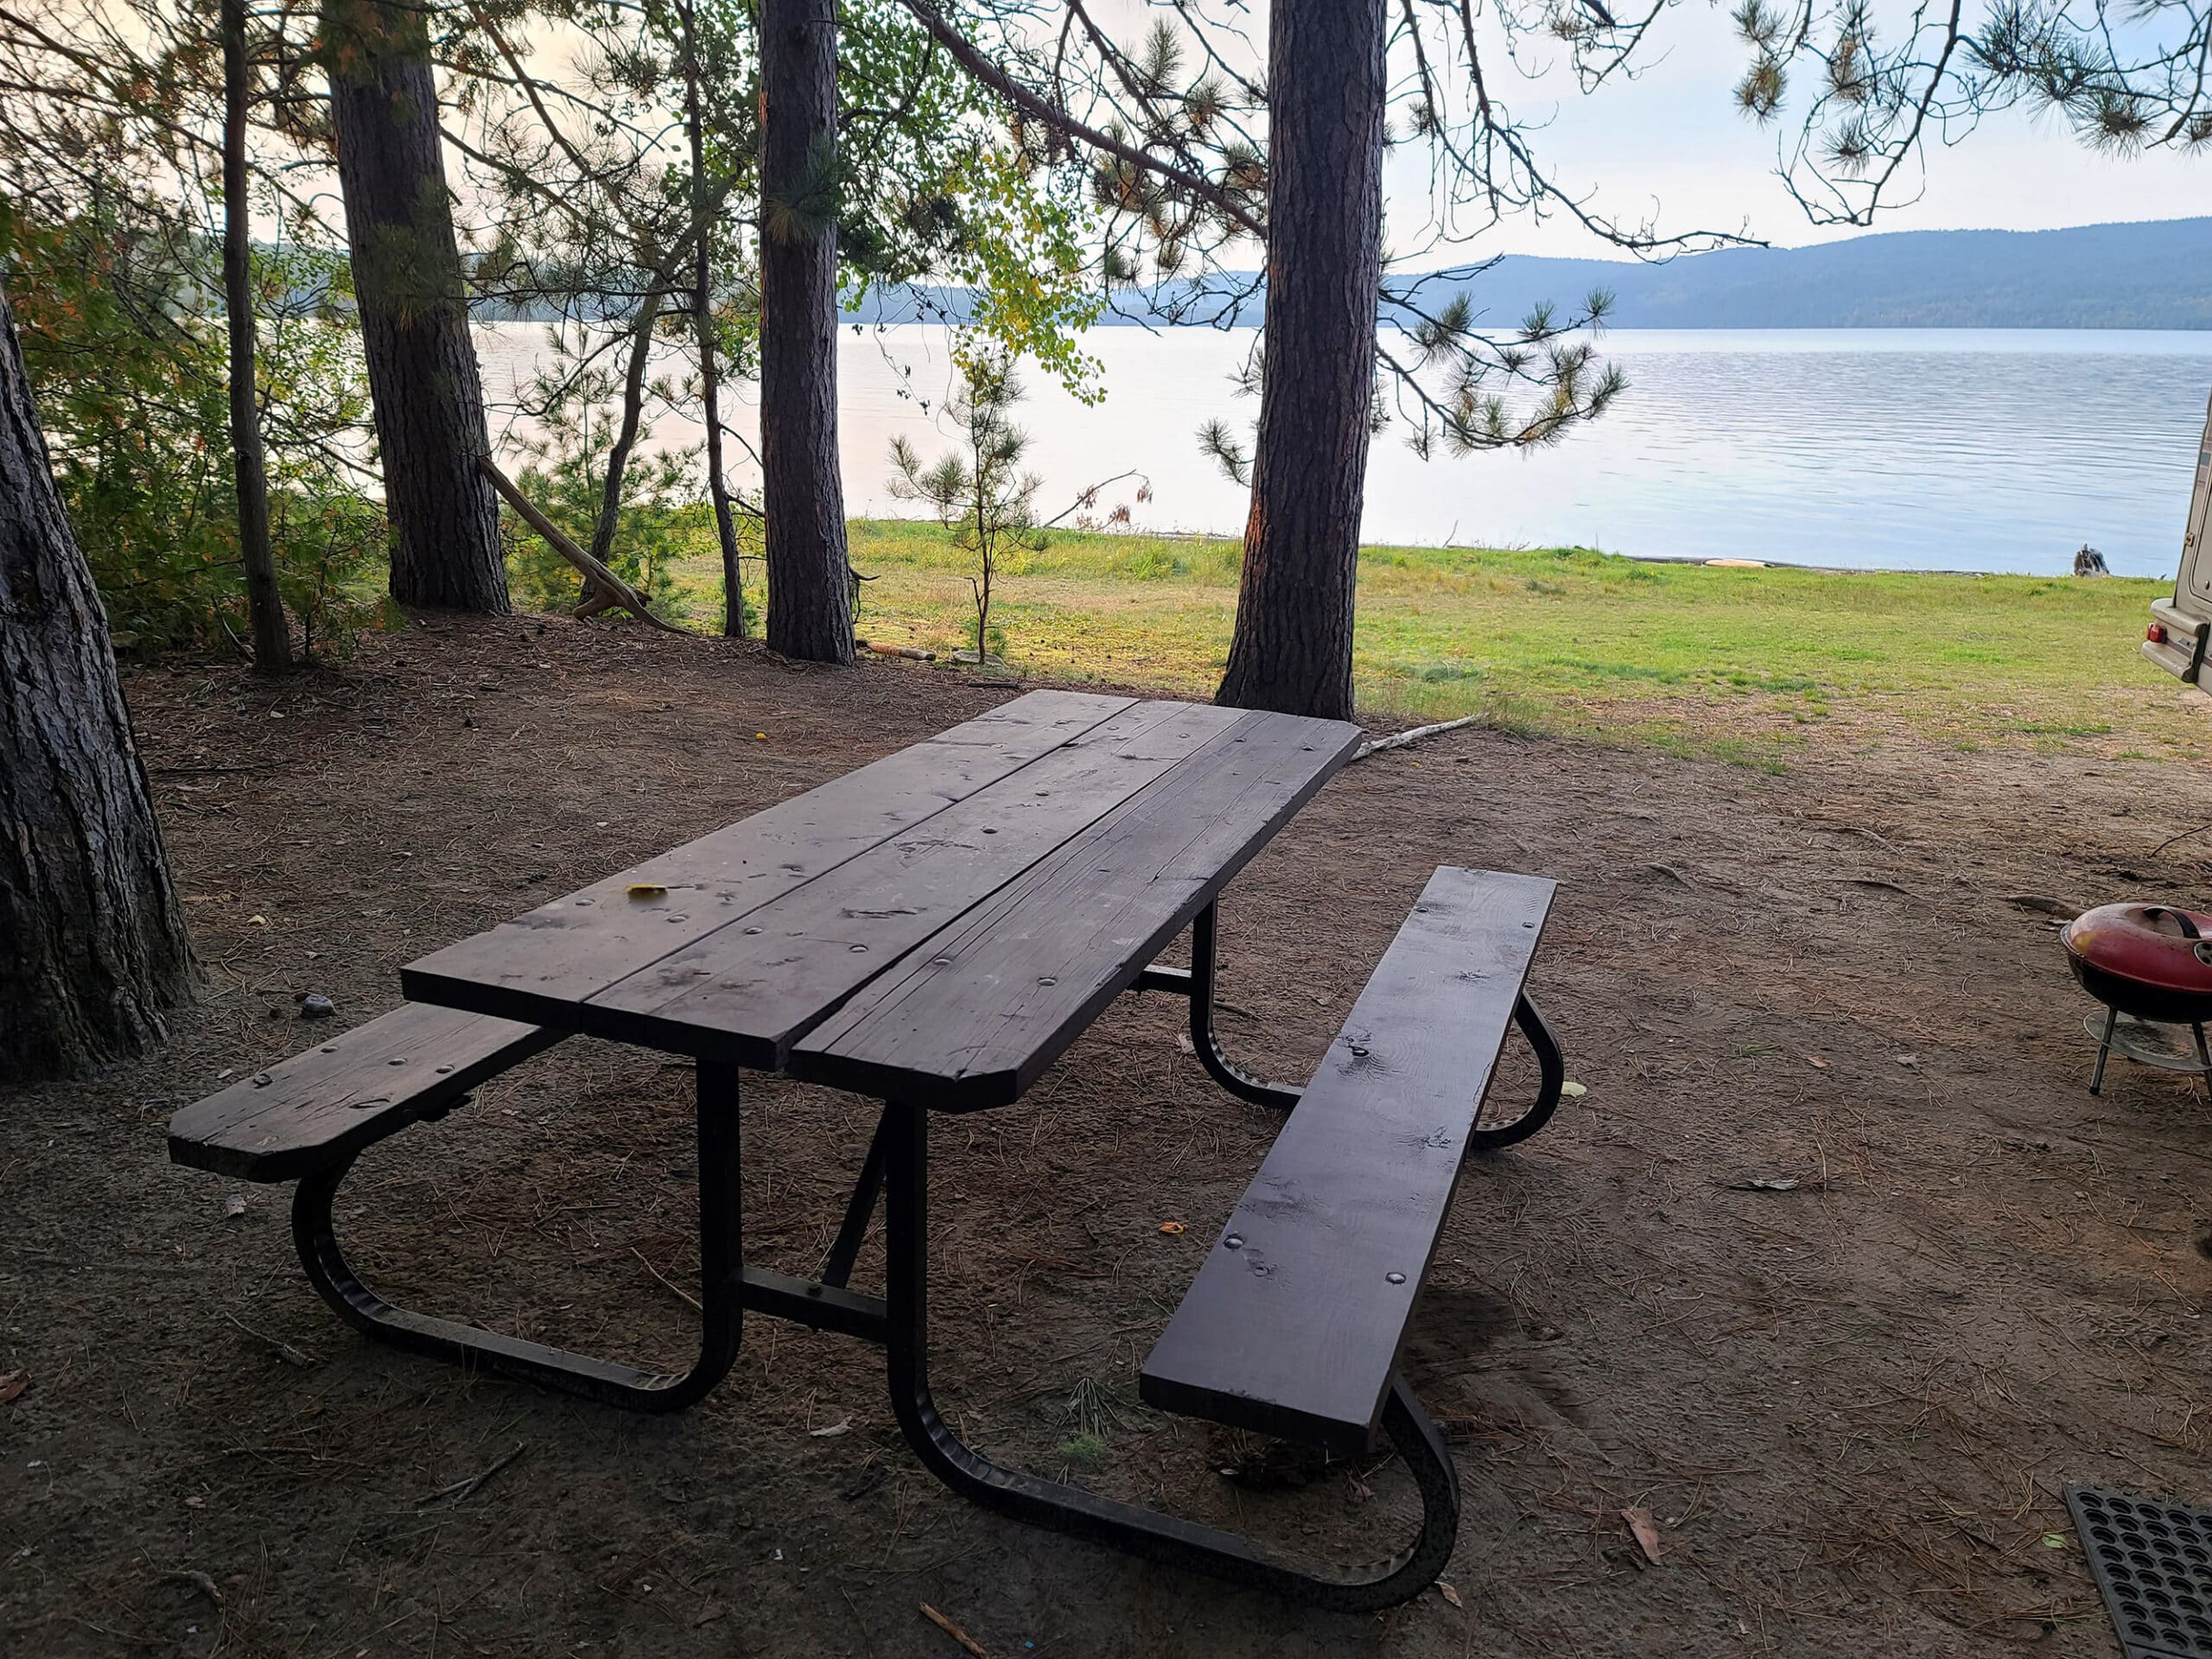 A large waterfront camp site with a picnic table in the foreground.